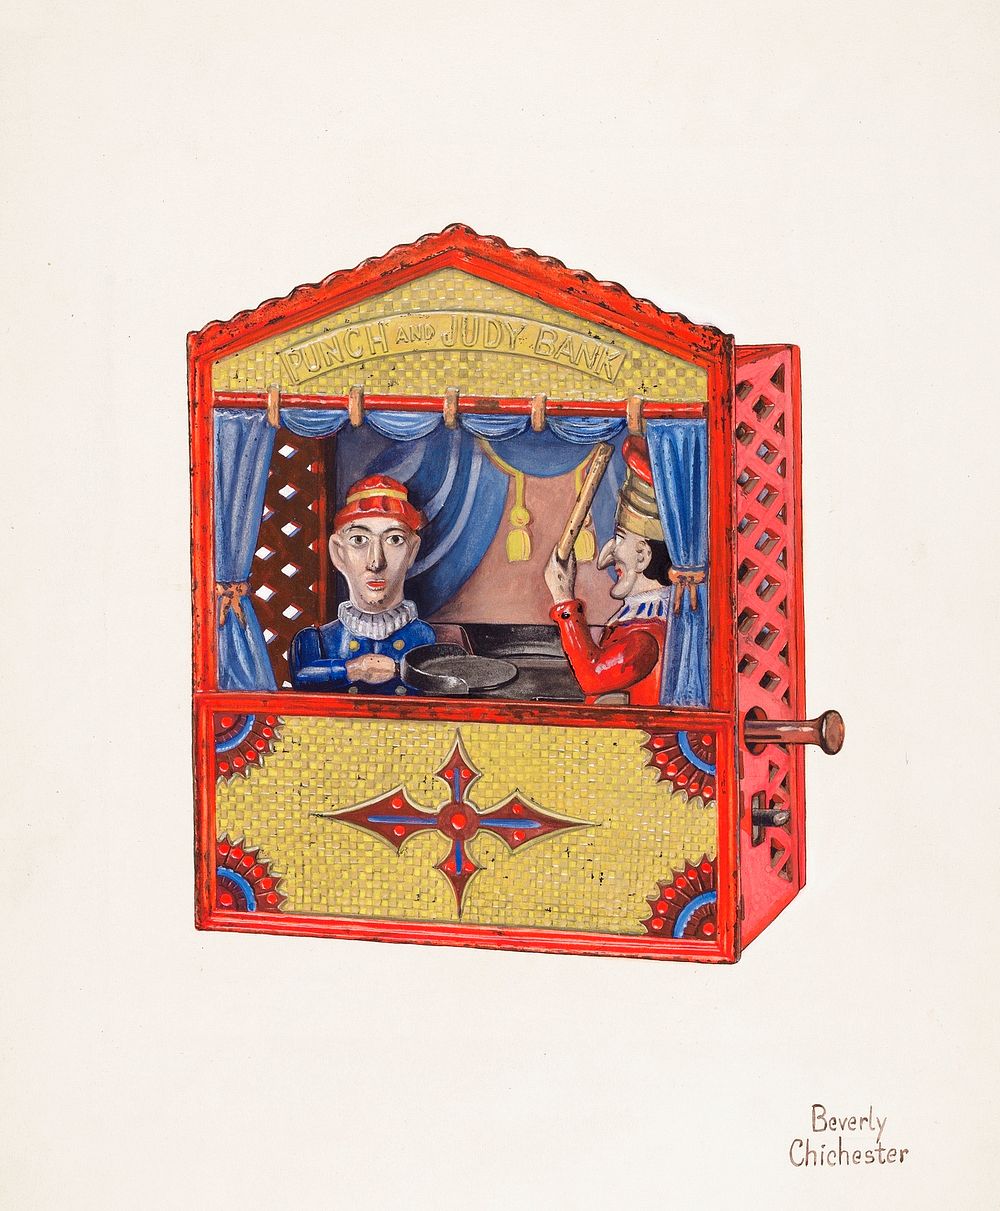 Punch & Judy Toy Bank (ca.1937) by Beverly Chichester. Original from The National Gallery of Art. Digitally enhanced by…